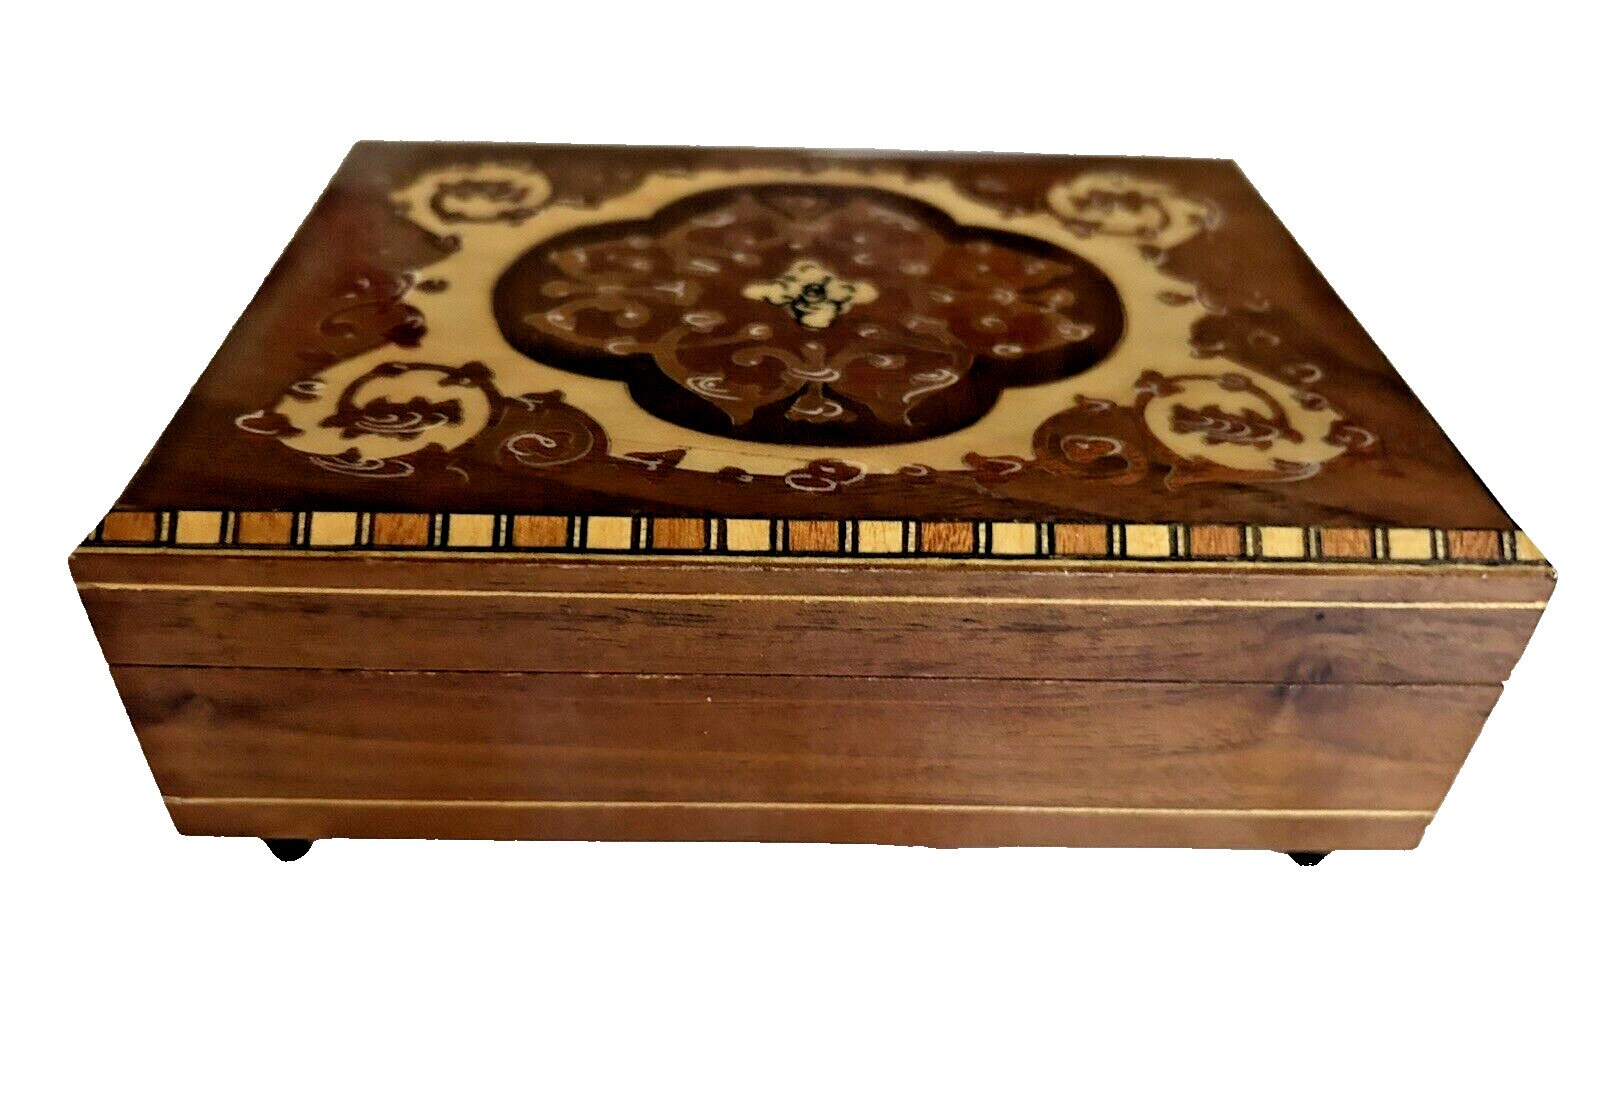 Vintage Italian Inlaid Lacquered Wooden Jewelry Music Box Made in Italy Works